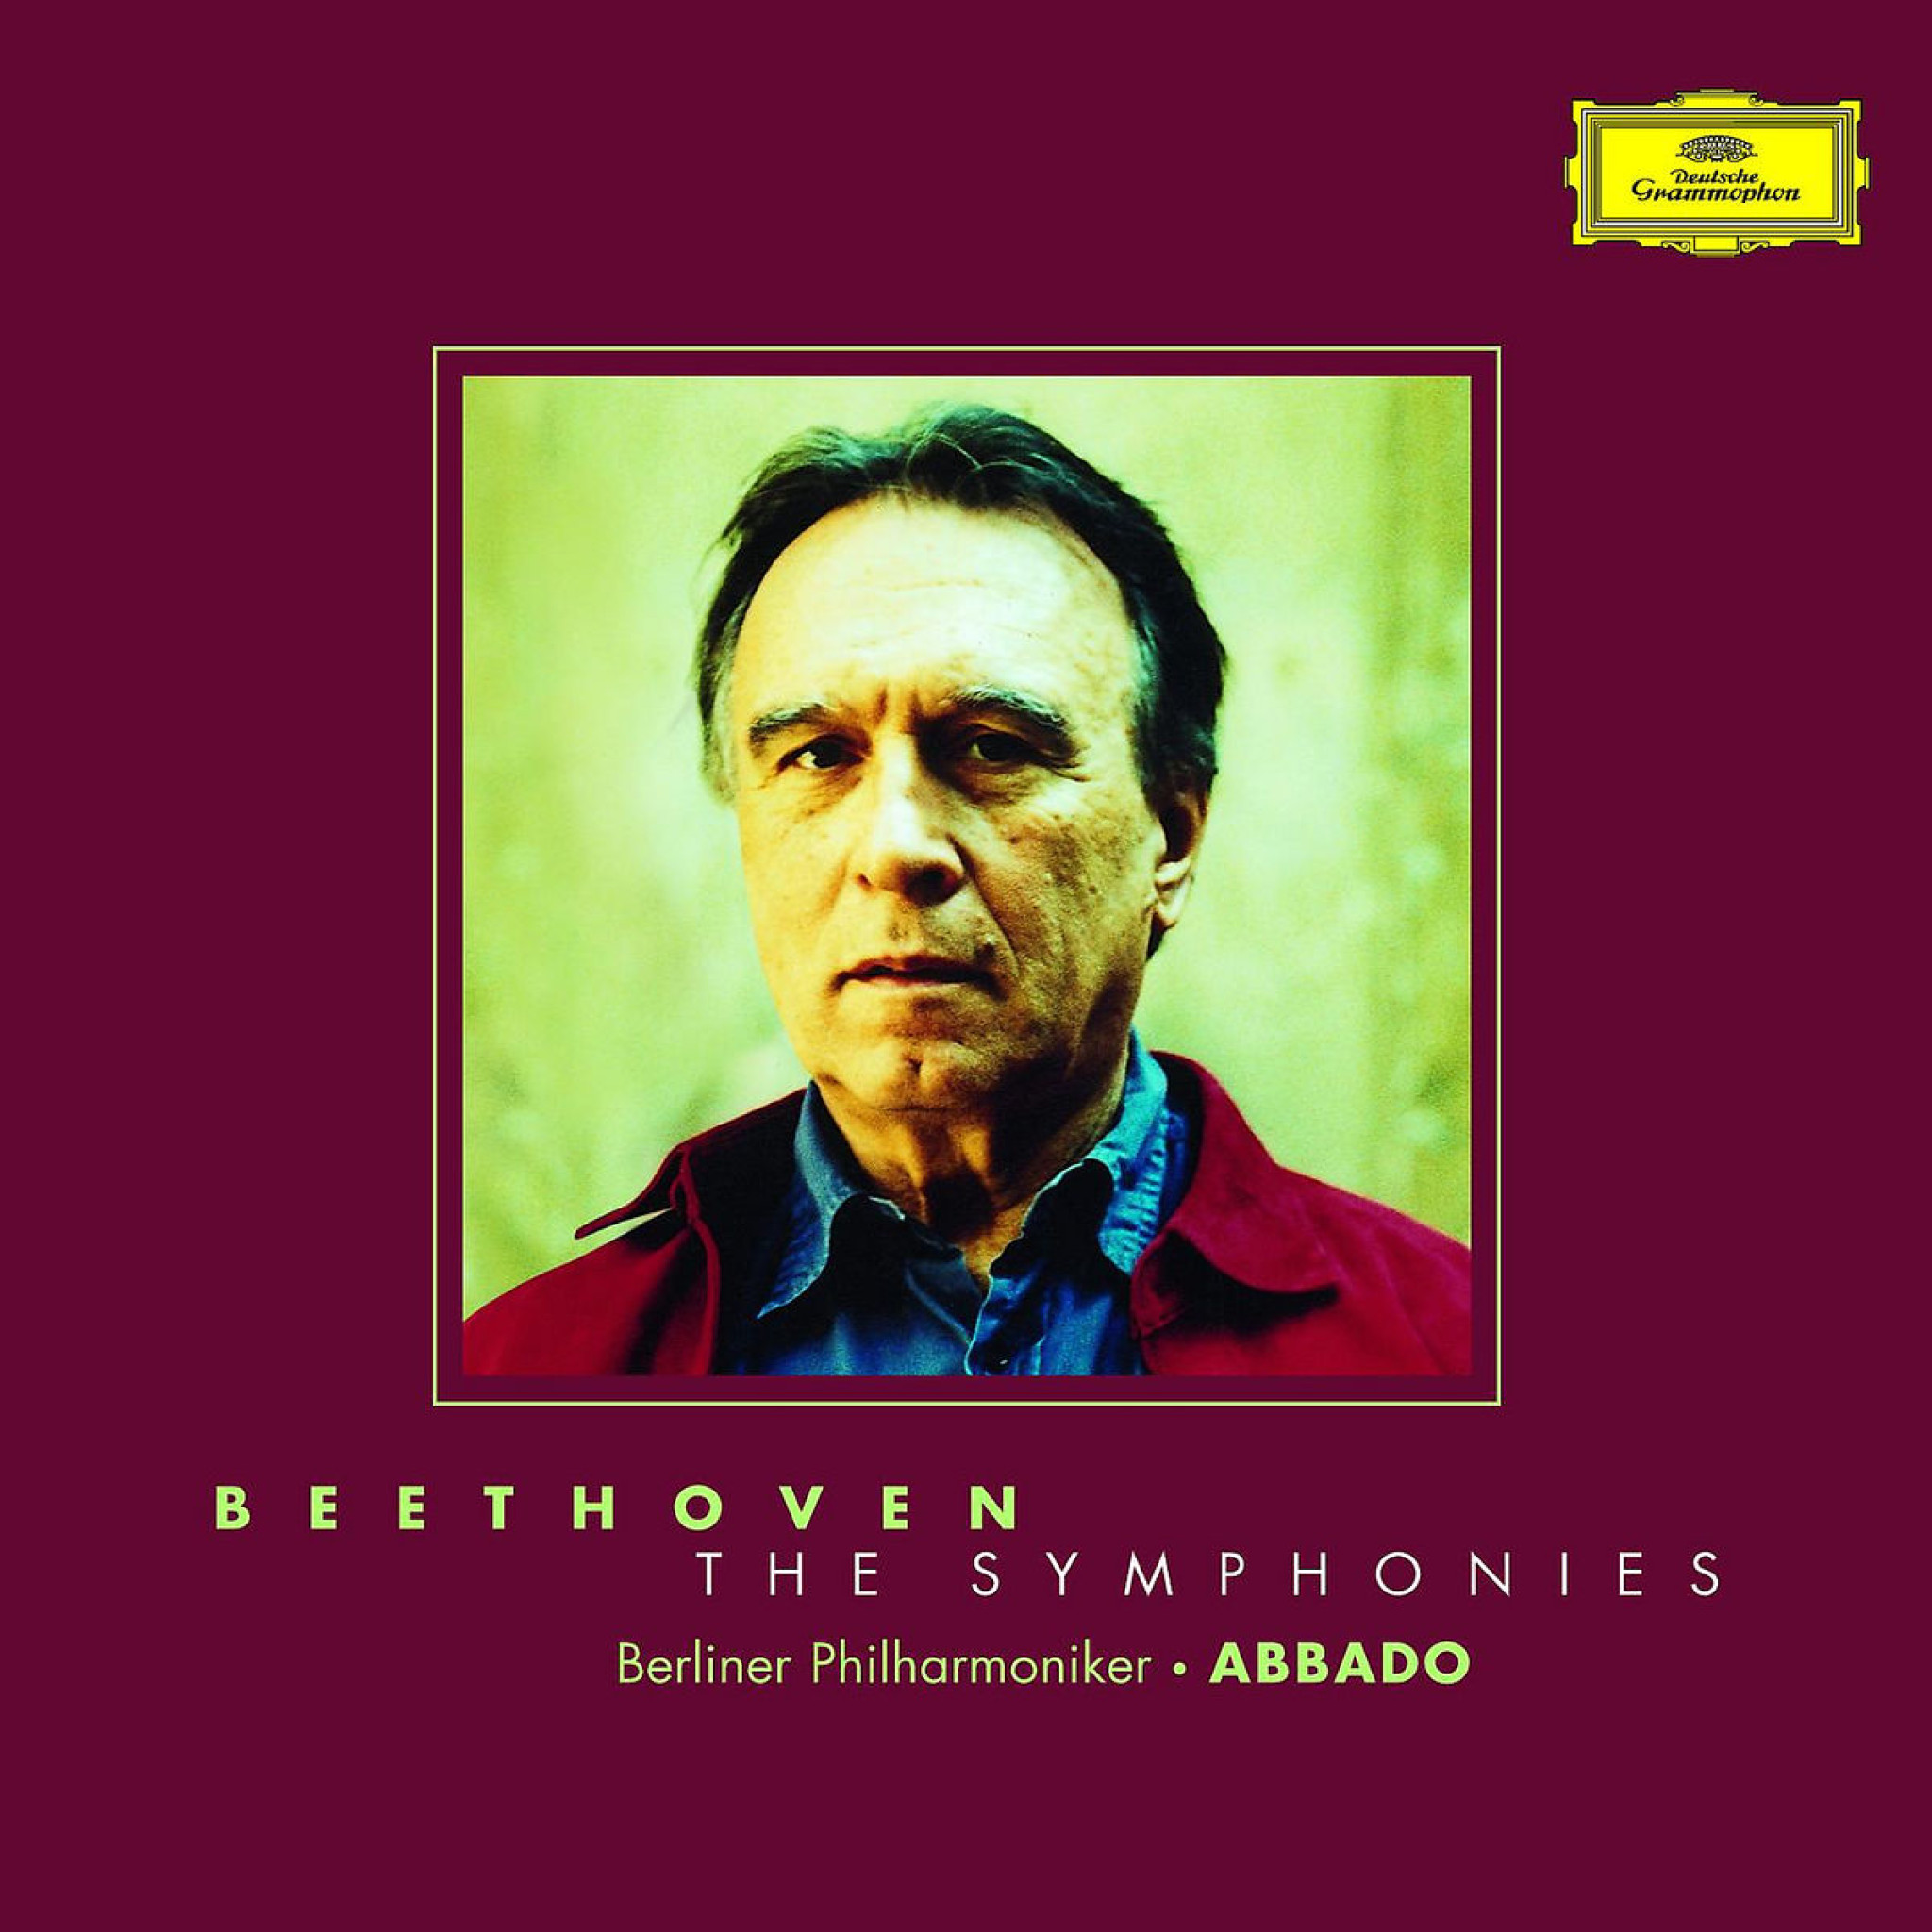 Beethoven: The Symphonies 0028947758648